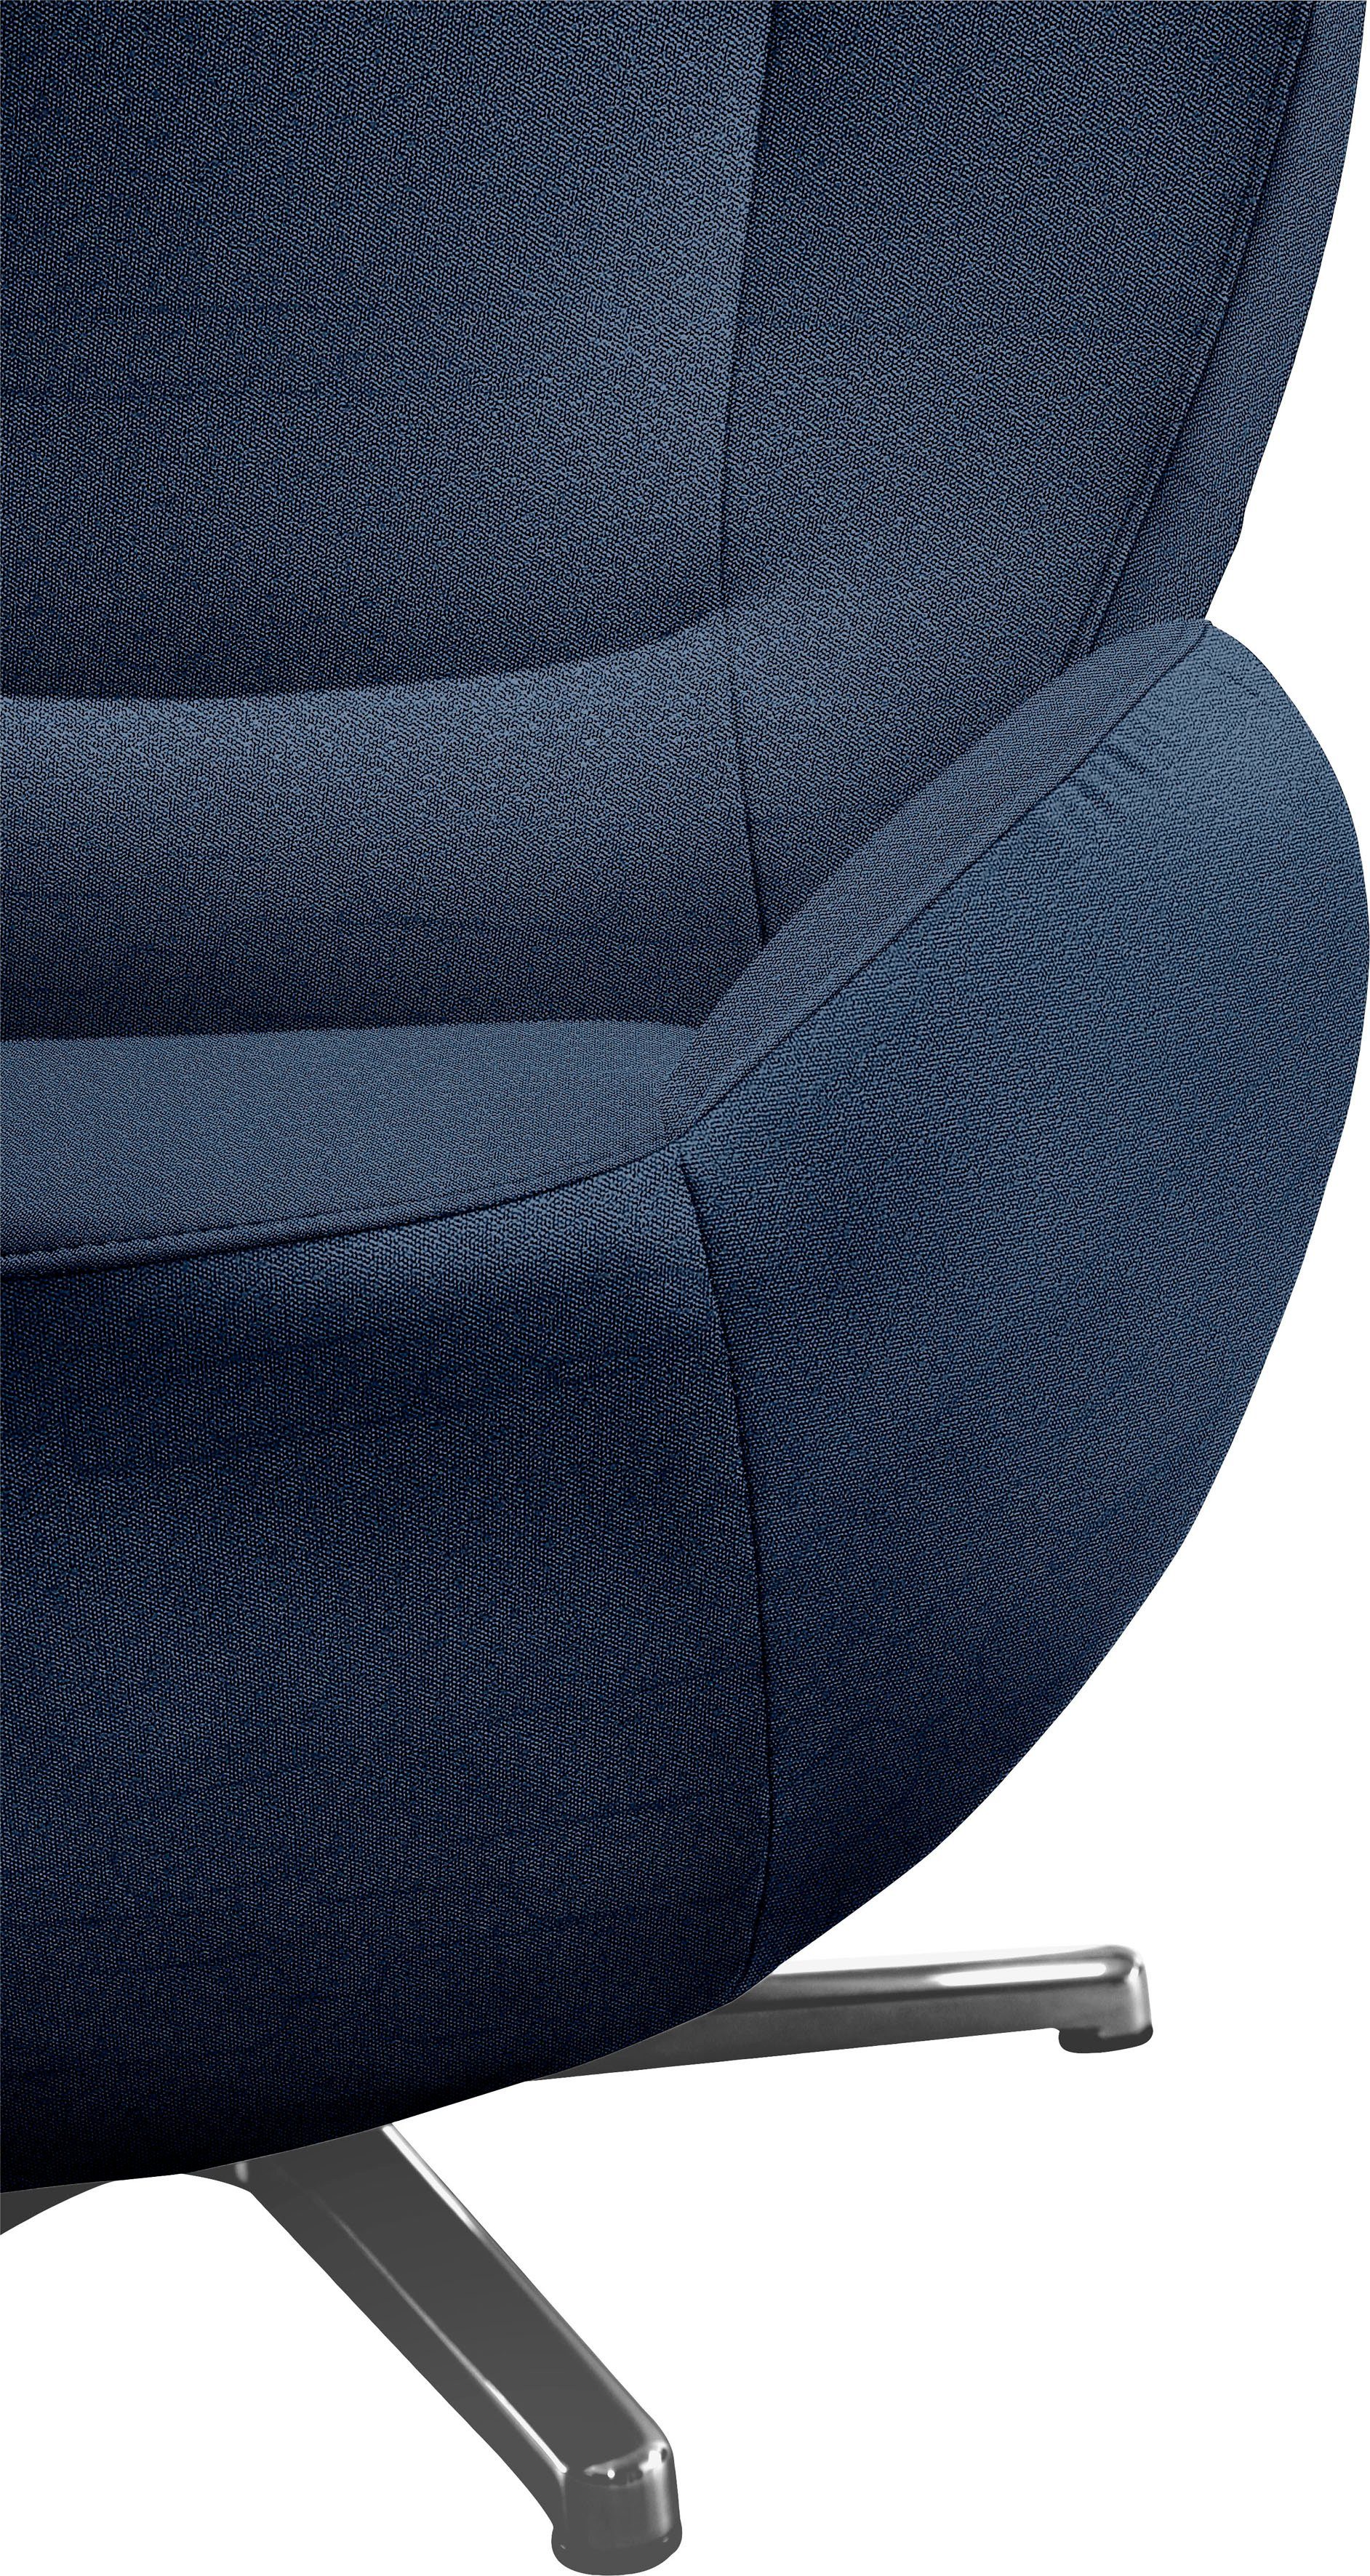 Loungesessel HOME TOM TAILOR Metall-Drehfuß Chrom PURE, in TOM mit